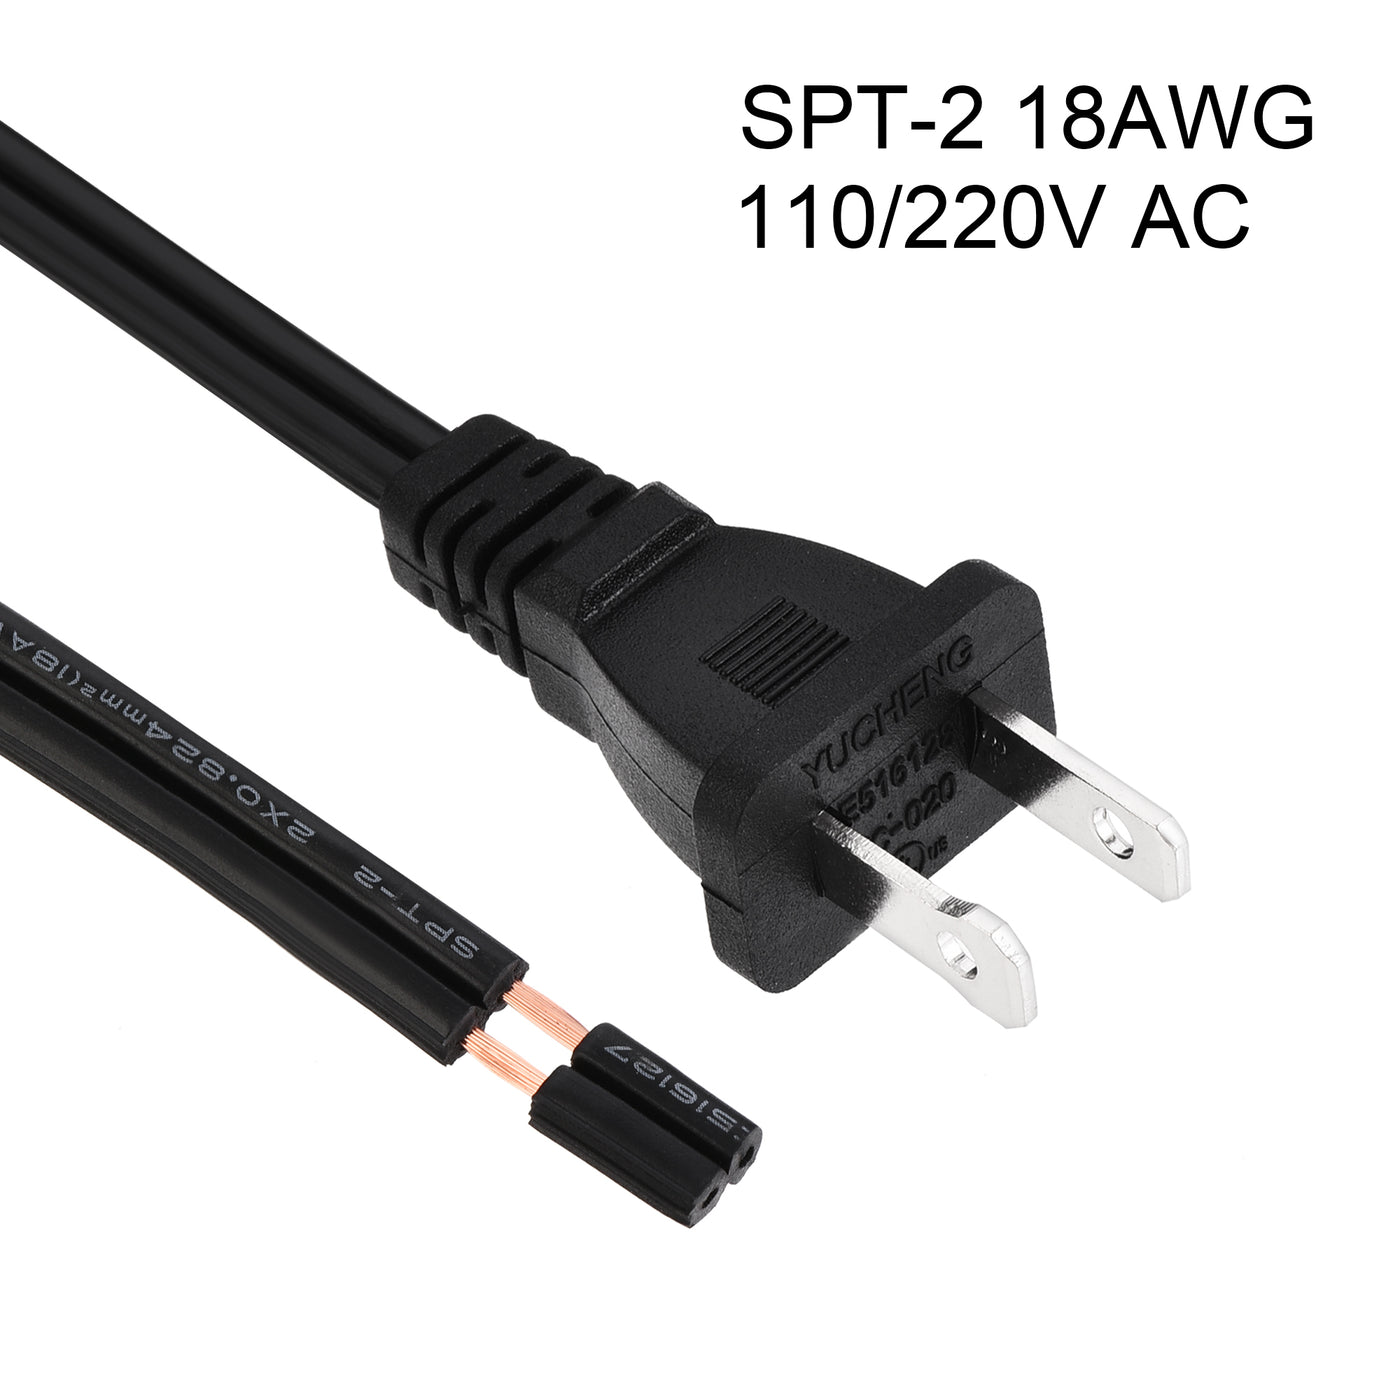 uxcell Uxcell US Plug Lamp Cord with Switch, SPT-2 18AWG Power Wire 1.8M Black, UL Listed